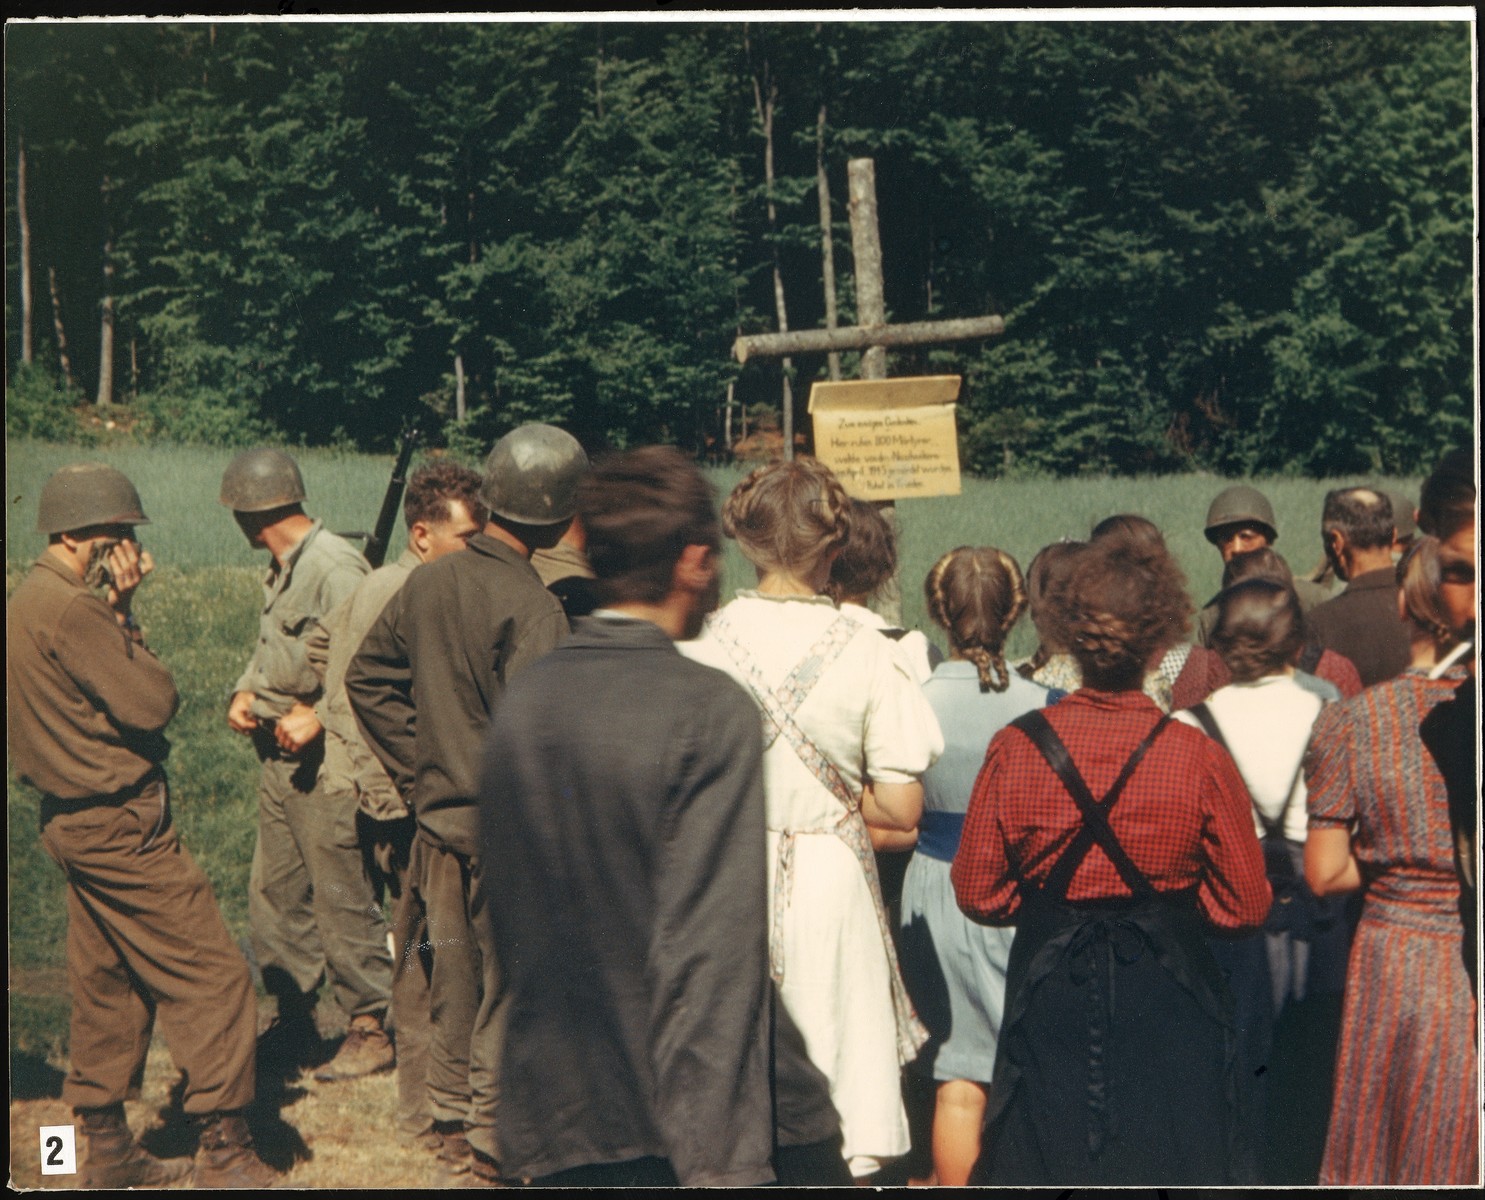 Under the direction of American soldiers, German civilians are forced to read the sign erected by the U.S. Army to mark the site of the Nammering atrocity.